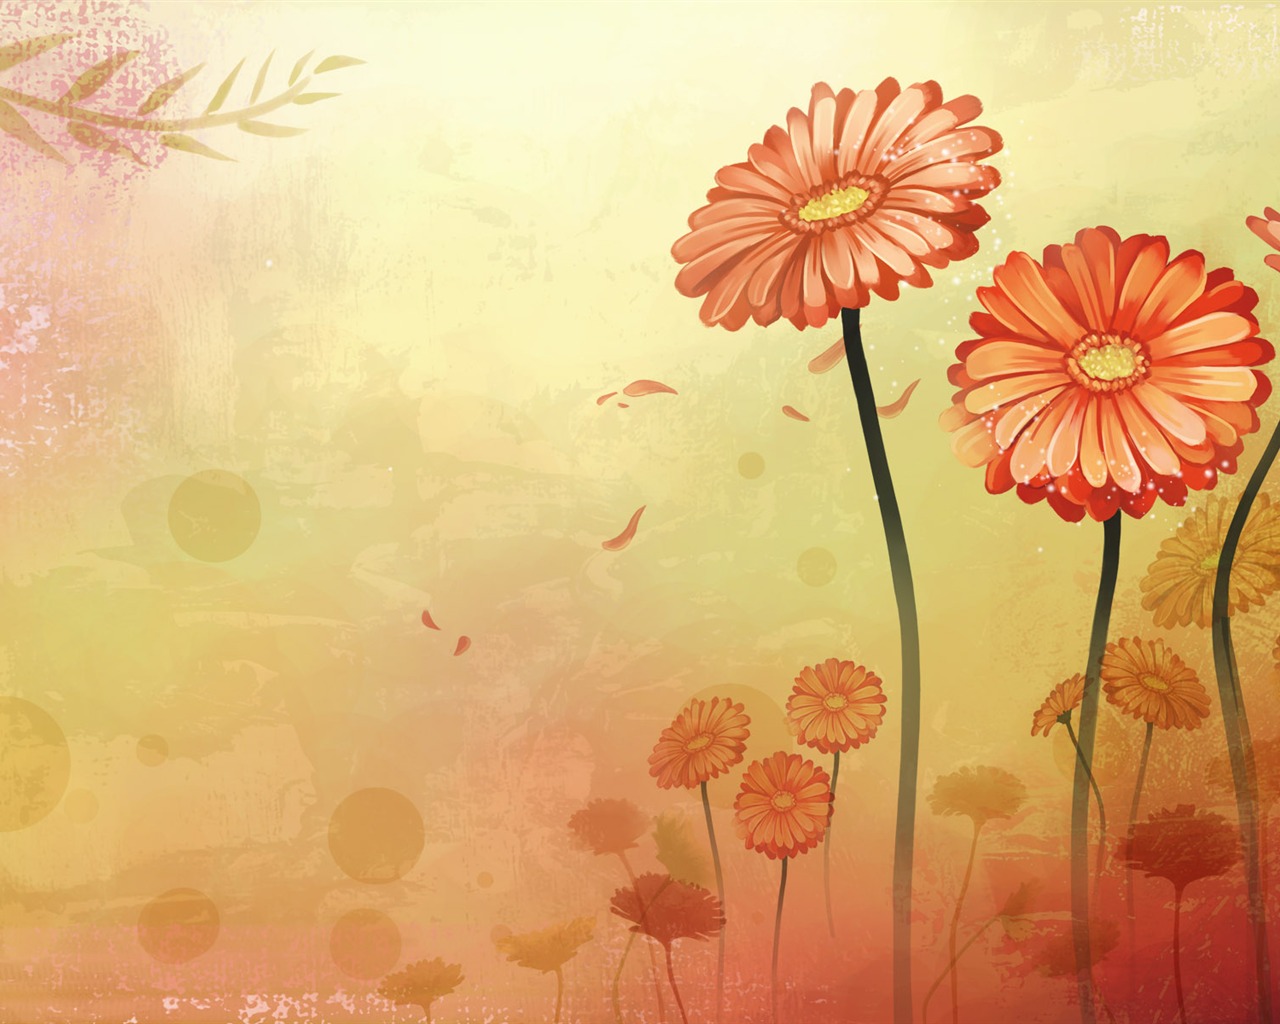 Synthetic Wallpaper Colorful Flower #28 - 1280x1024